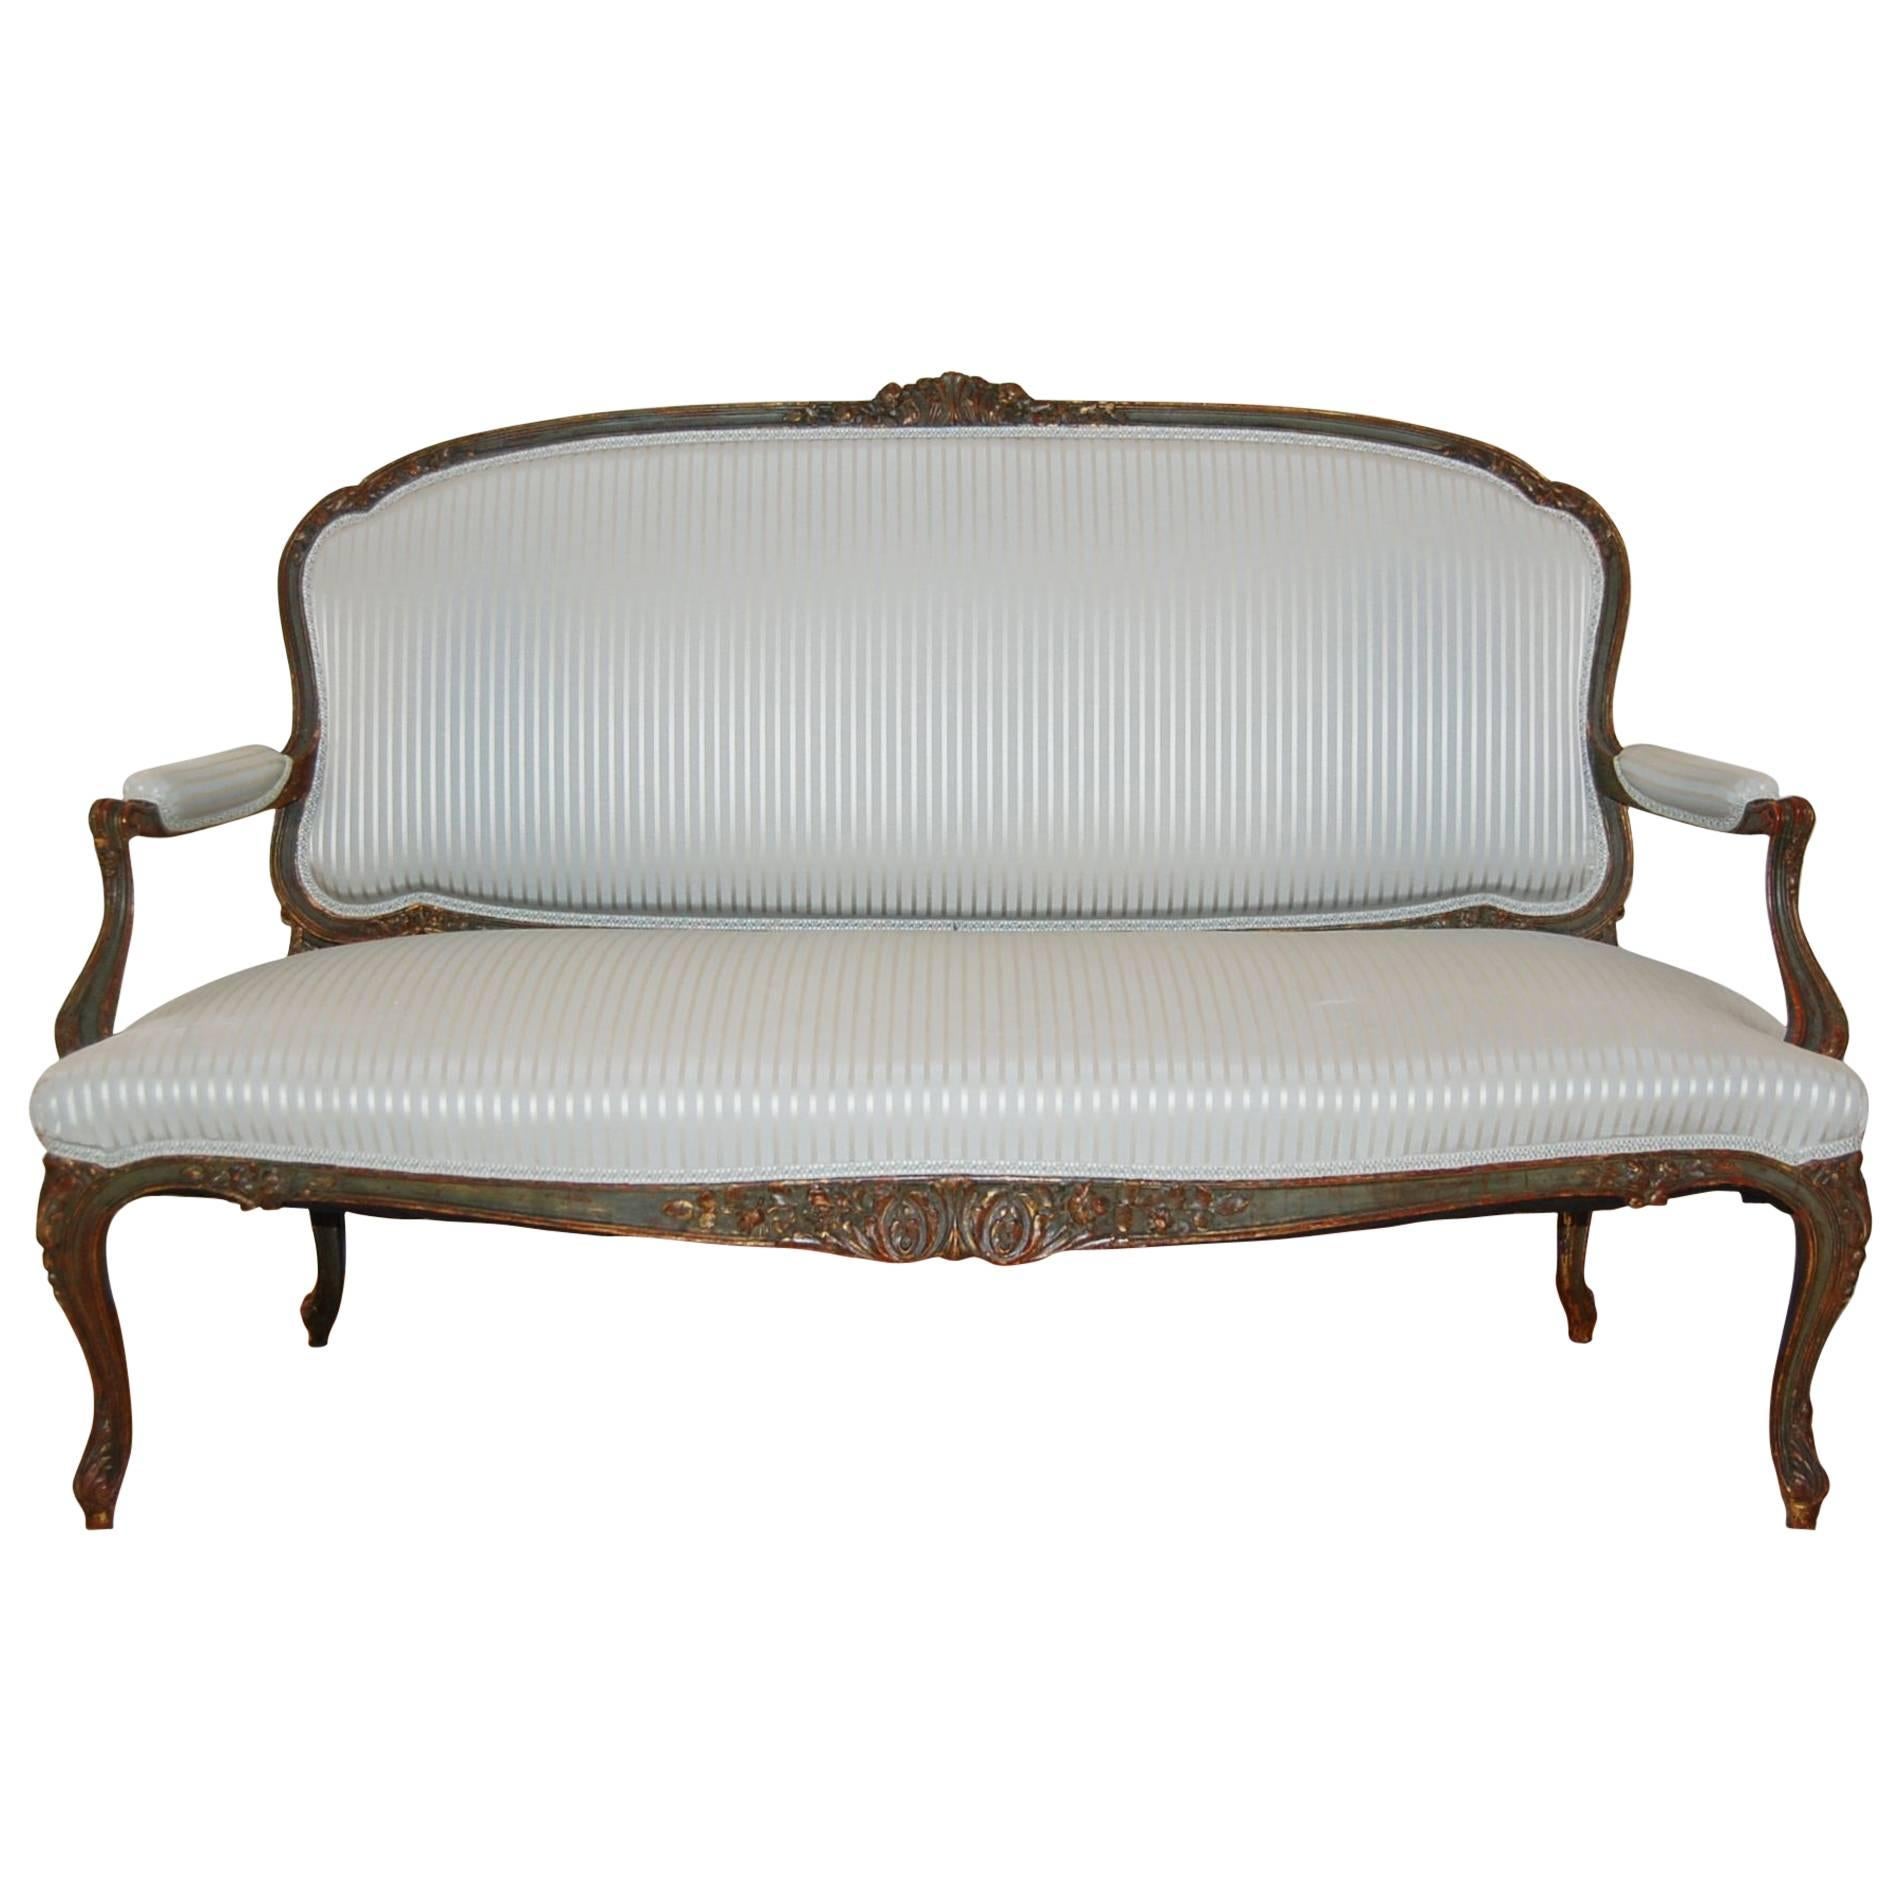 Mid-19th Century French Louis XV Style Painted Settee